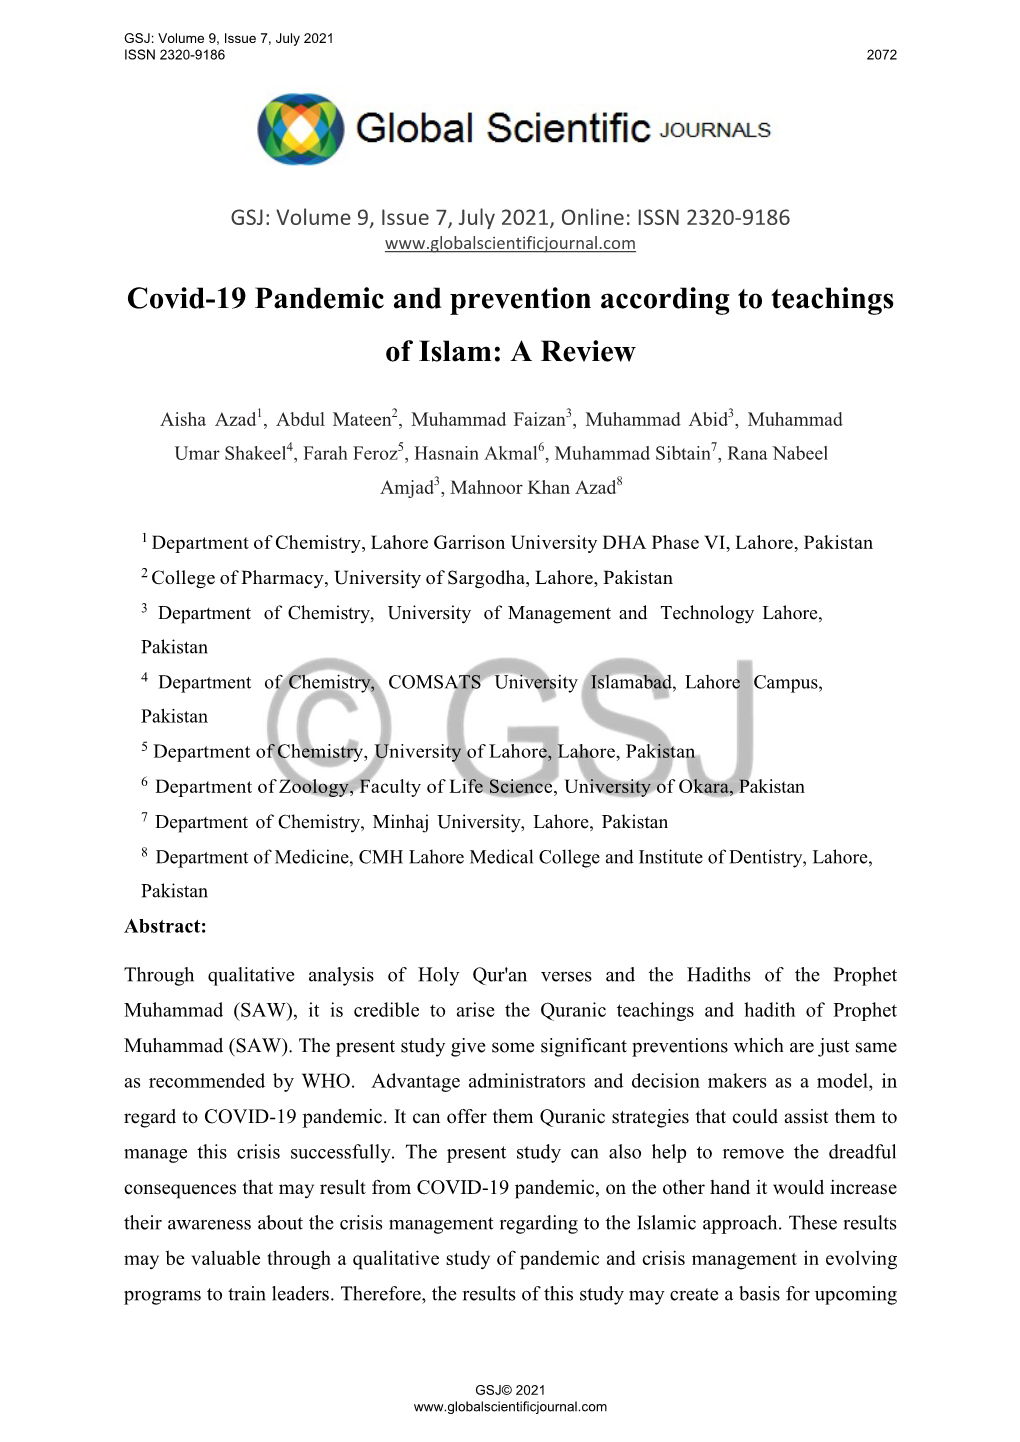 Covid-19 Pandemic and Prevention According to Teachings of Islam: a Review